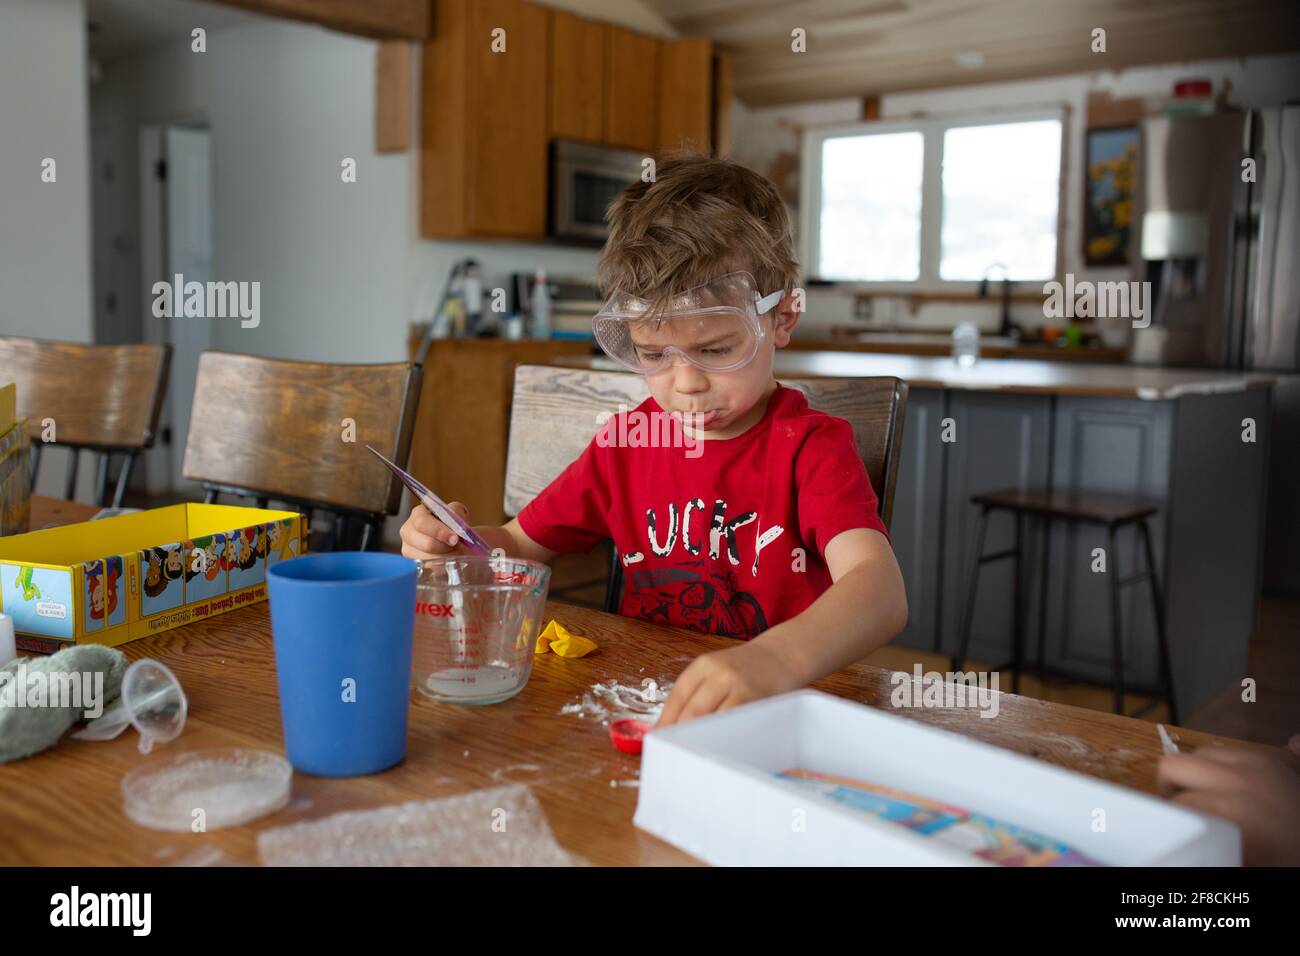 Boy pouting over science experiment gone wrong Stock Photo